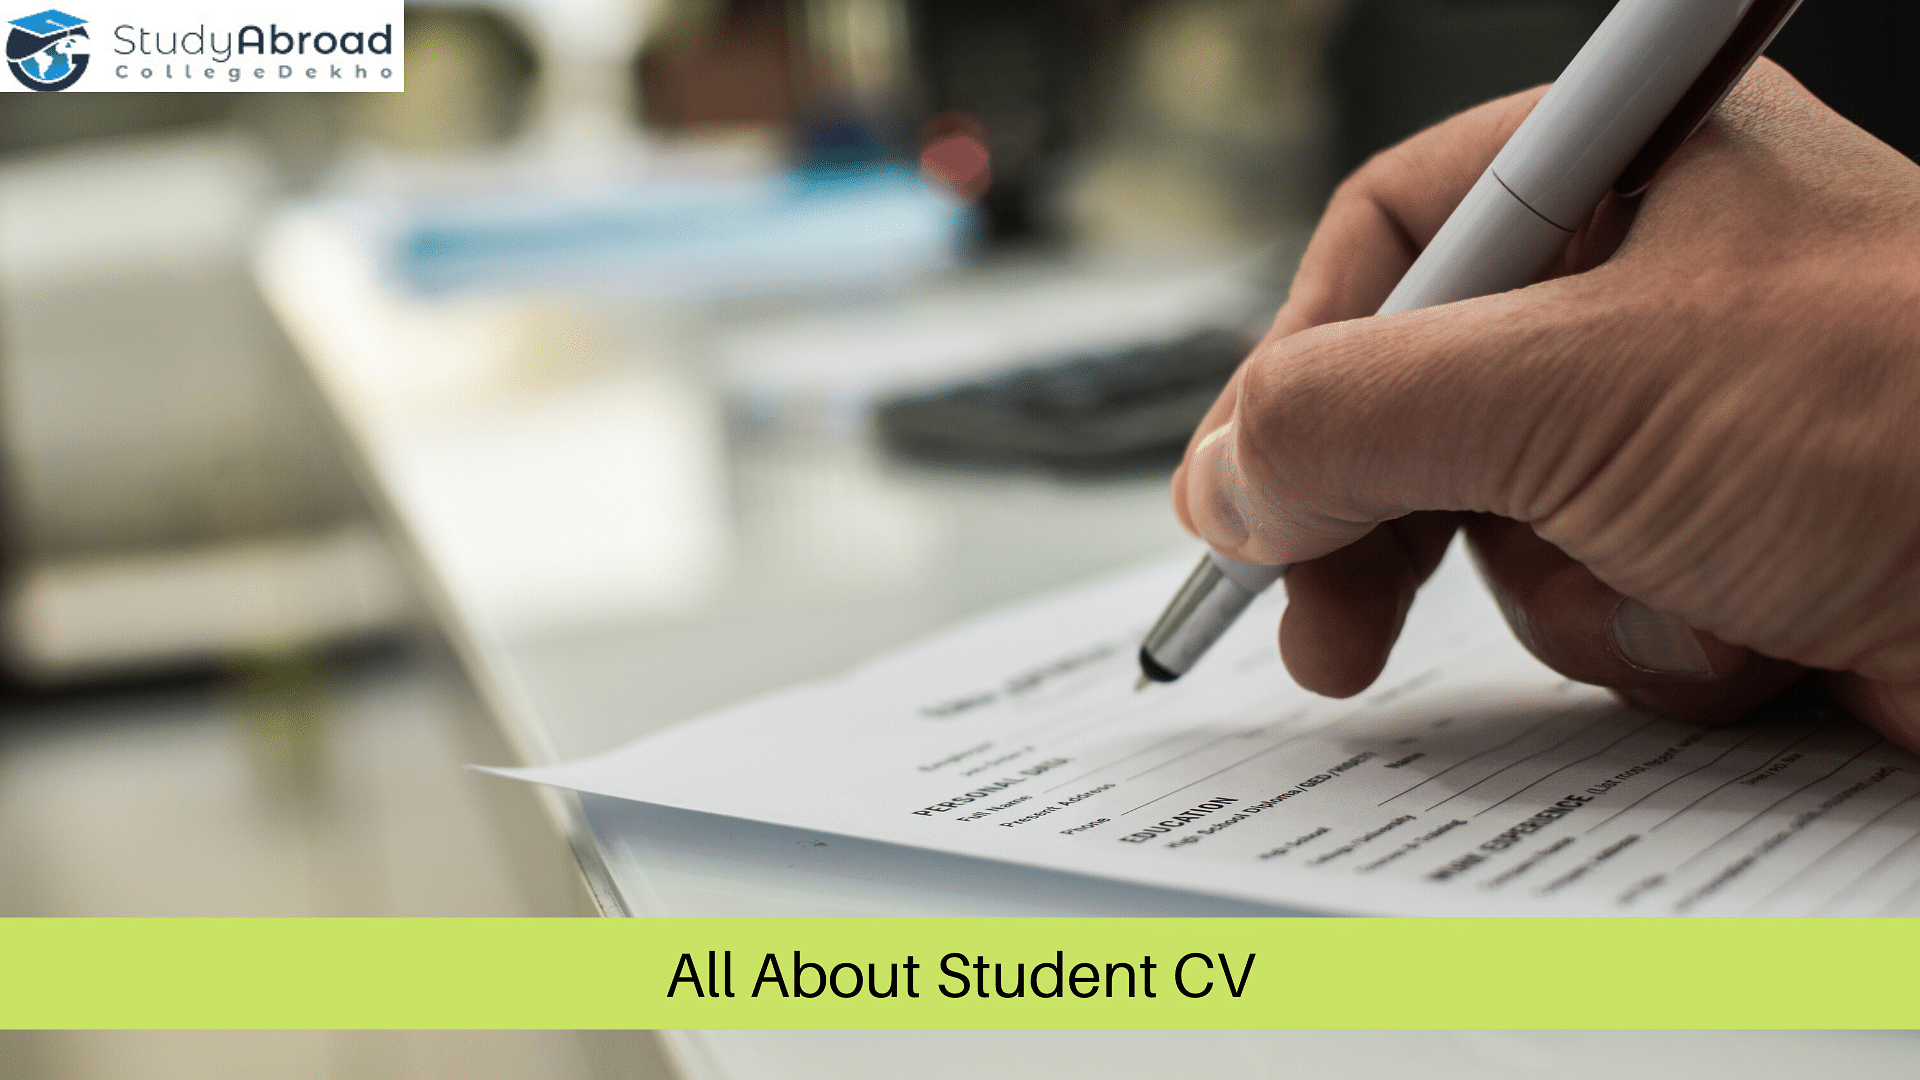 All About Student CV